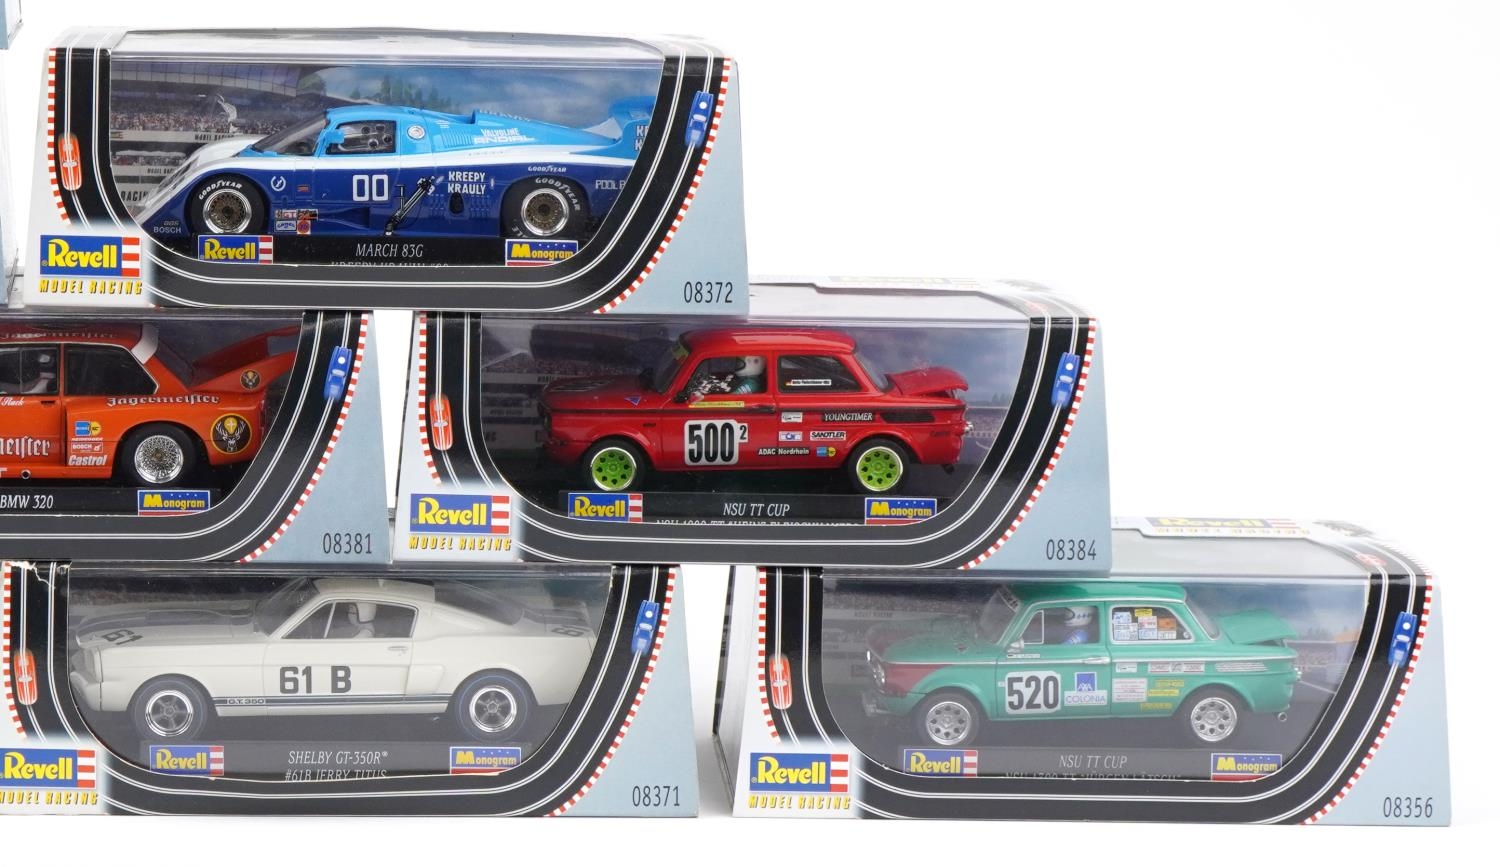 Thirteen Revell 1:32 scale model slot cars with cases including Porsche 904 GTS, 601TLRC and BMW 320 - Image 3 of 3